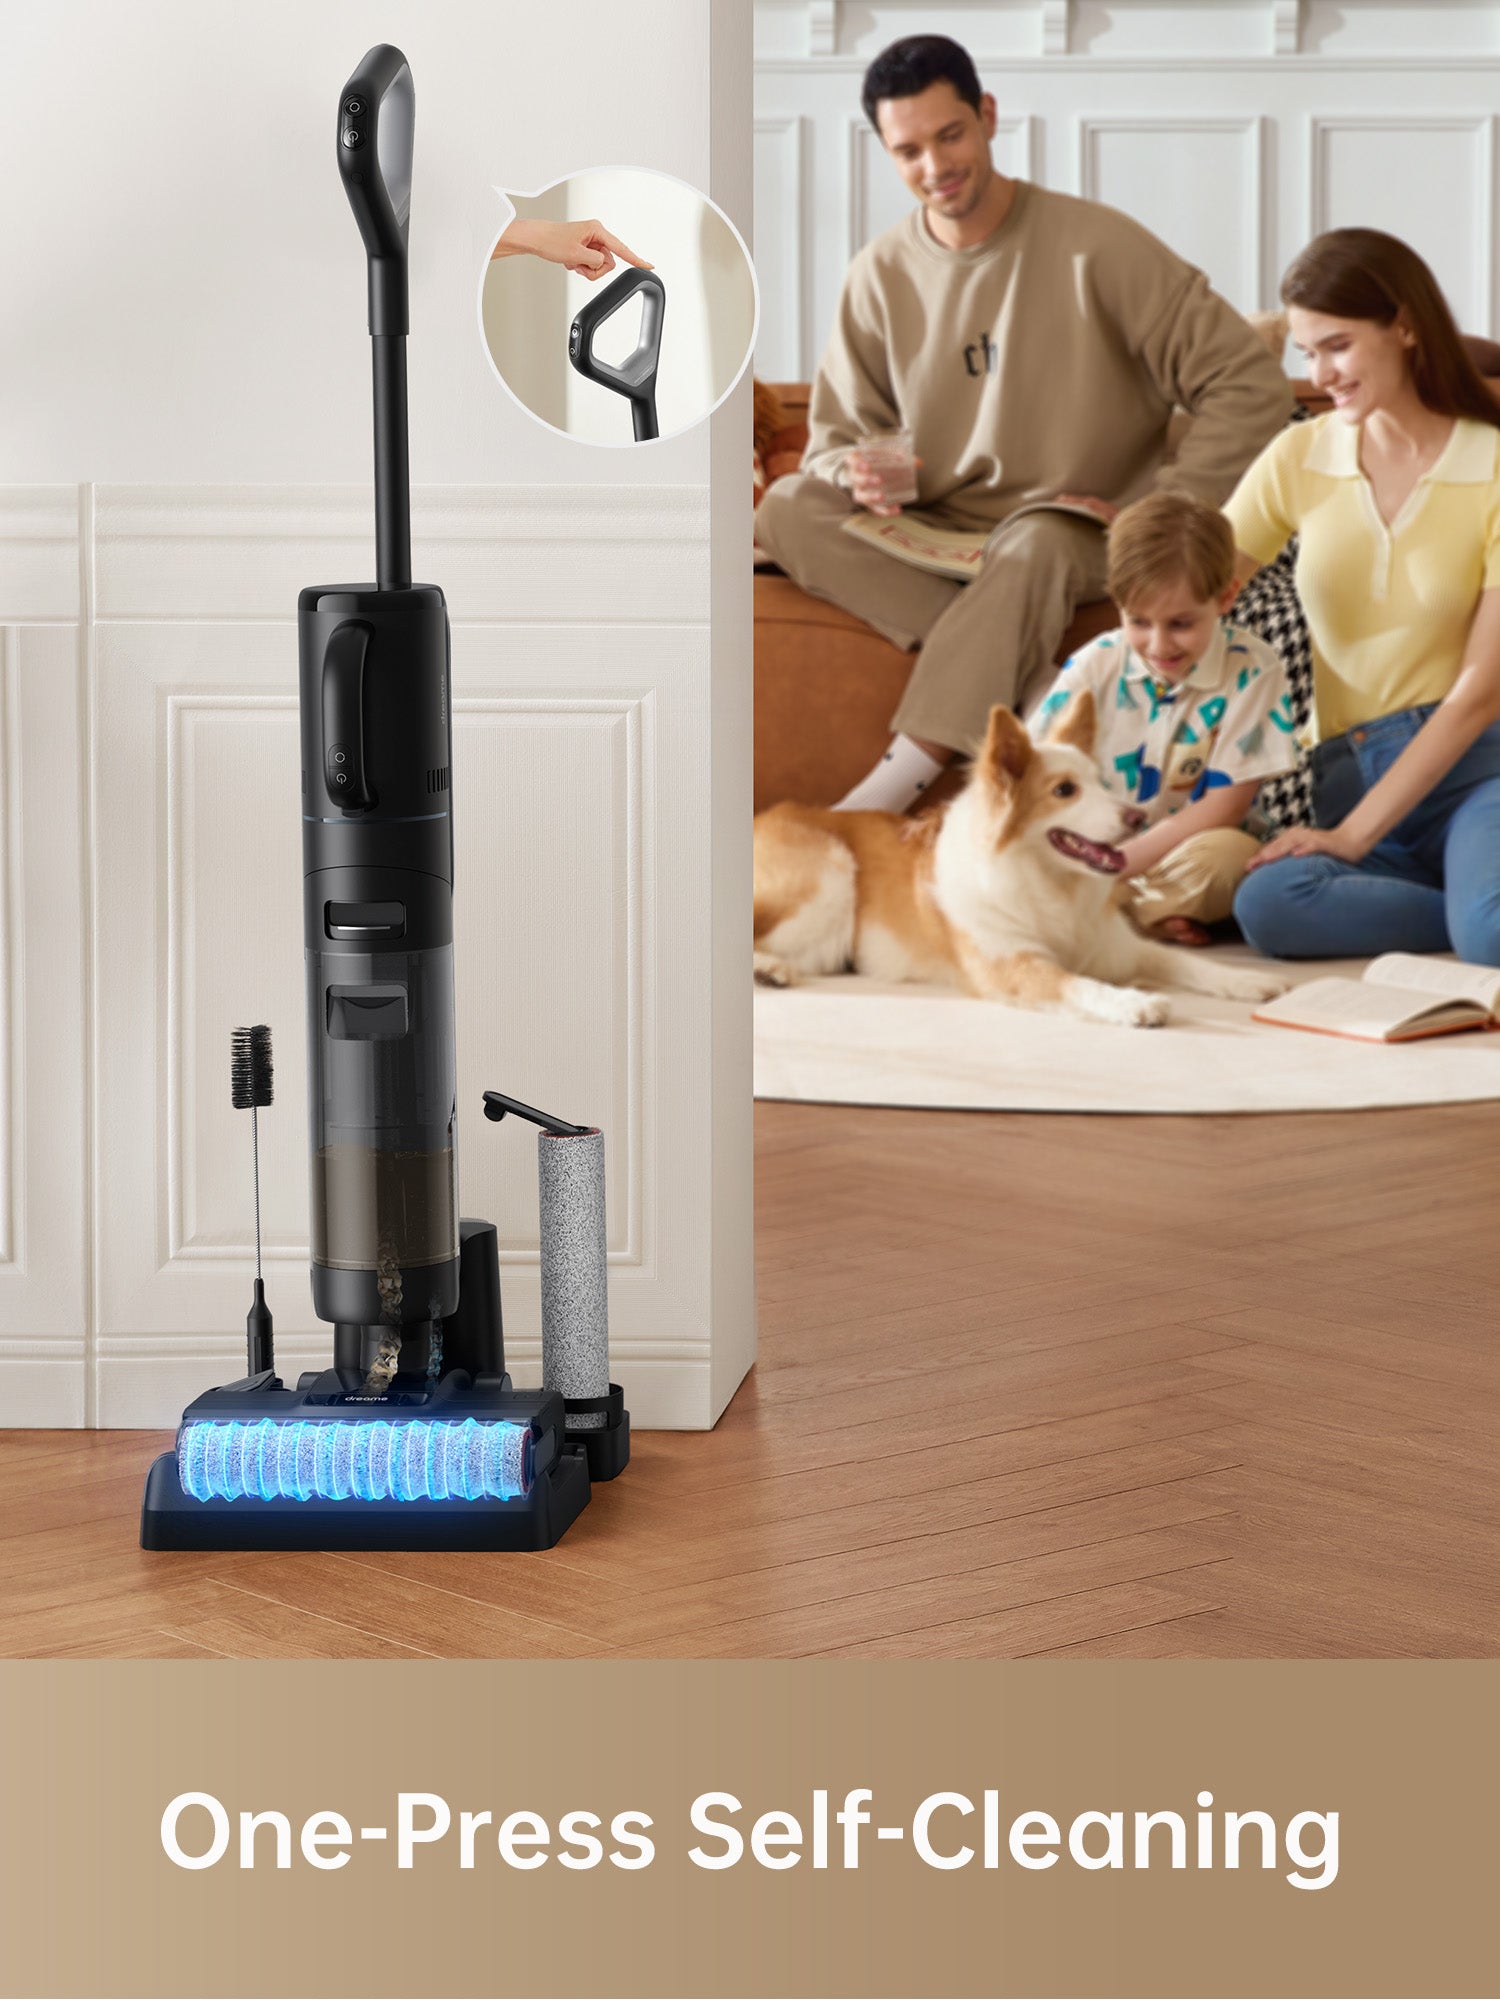 Dreame H12 Dual Wet and Dry Vacuum 4 In 1 Combo Kit